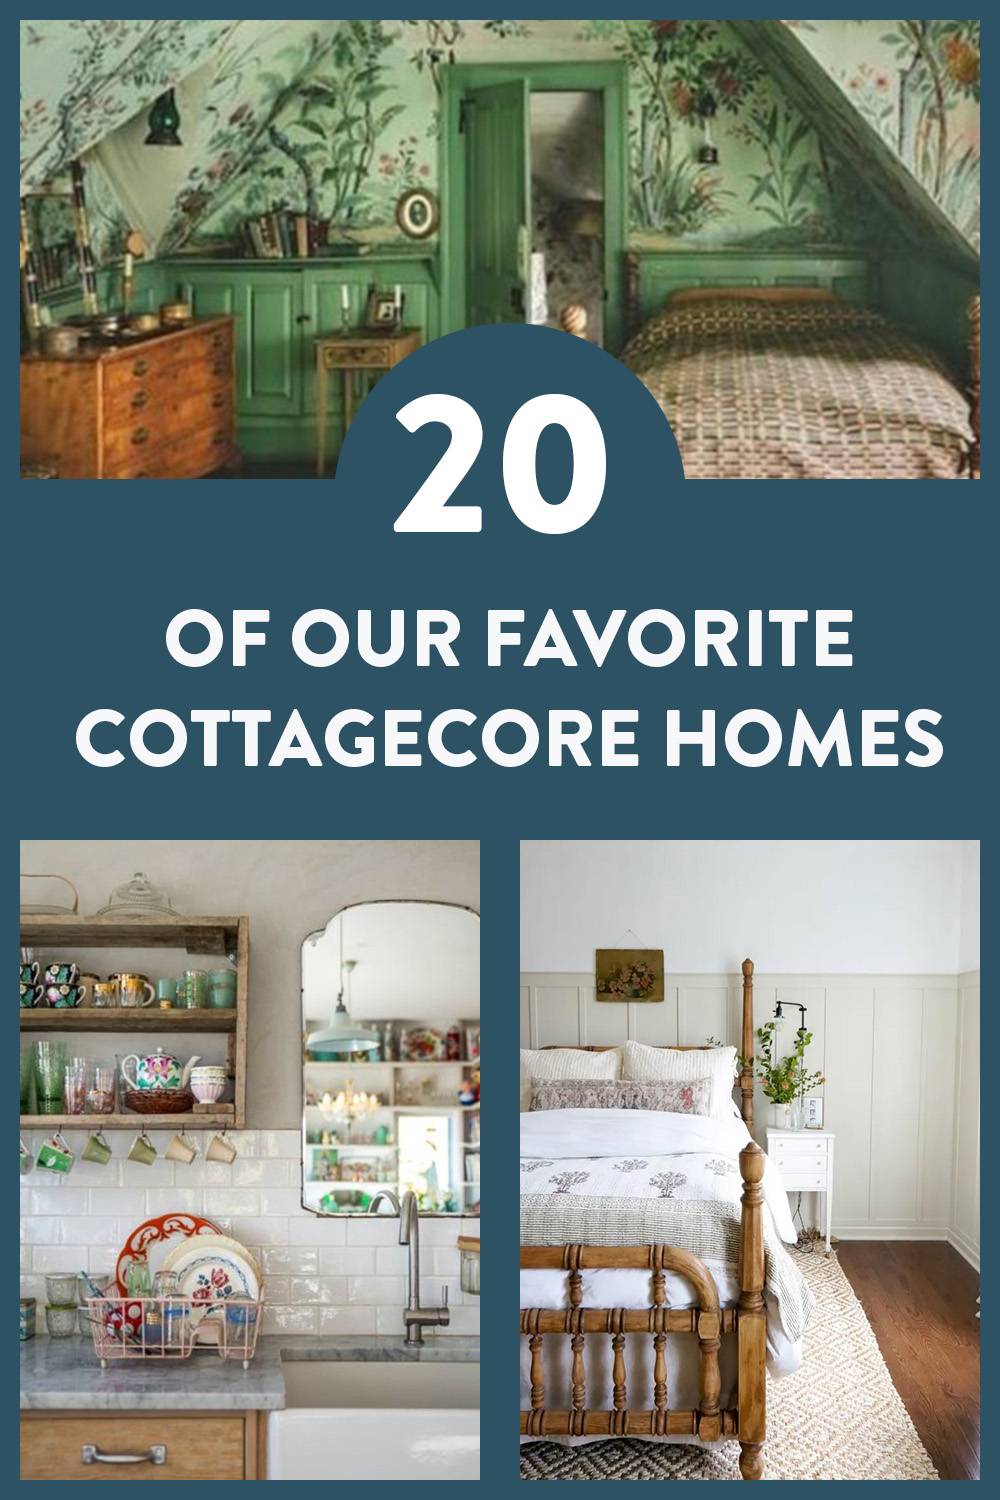 Quaint and Cozy: 20 of Our Favorite Cottagecore Homes - Curbly